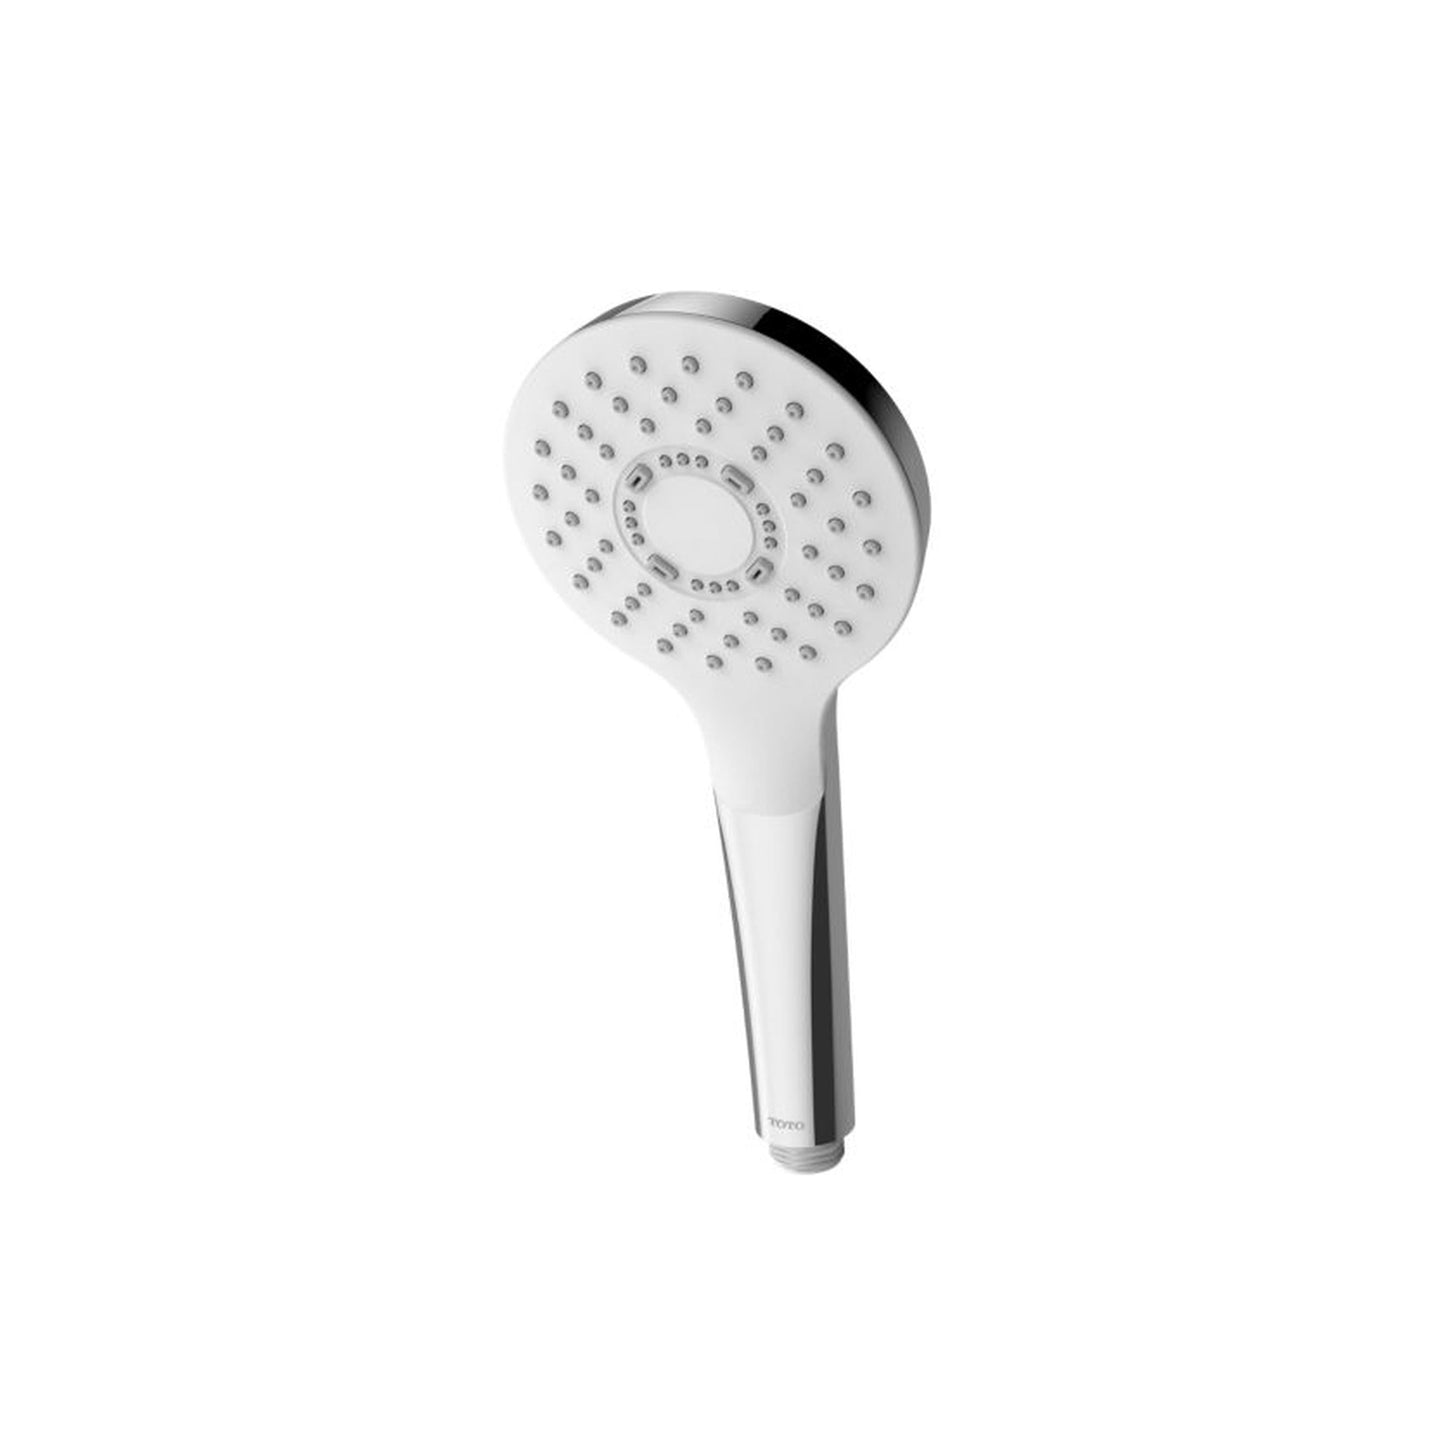 Toto Hs,3 Mode,1.75GPM,G,Round Brushed Nickel